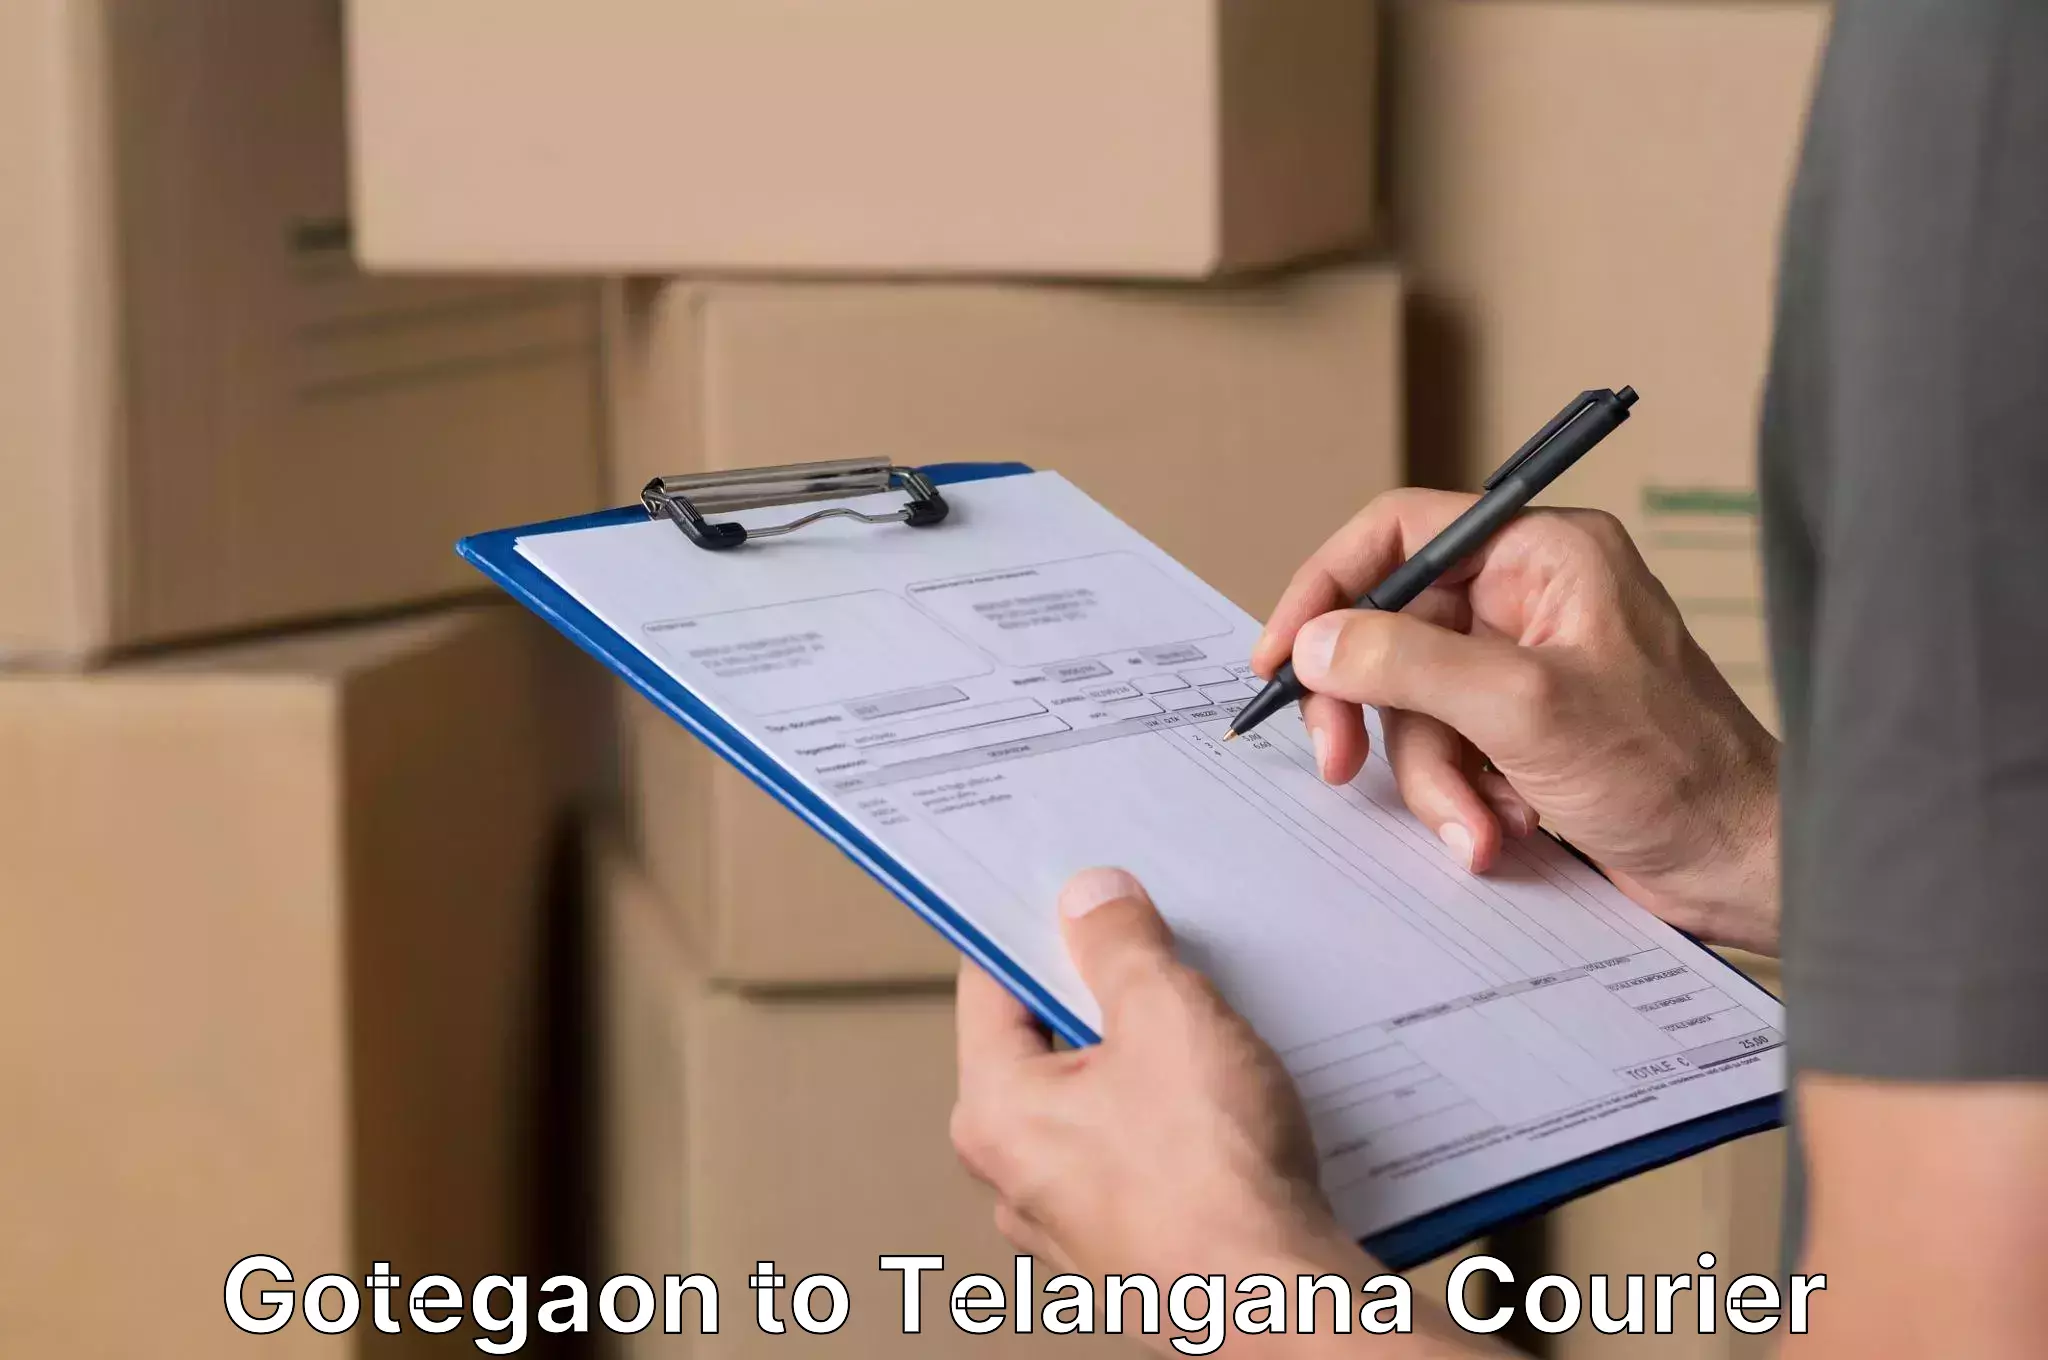 Trusted relocation experts Gotegaon to Adilabad